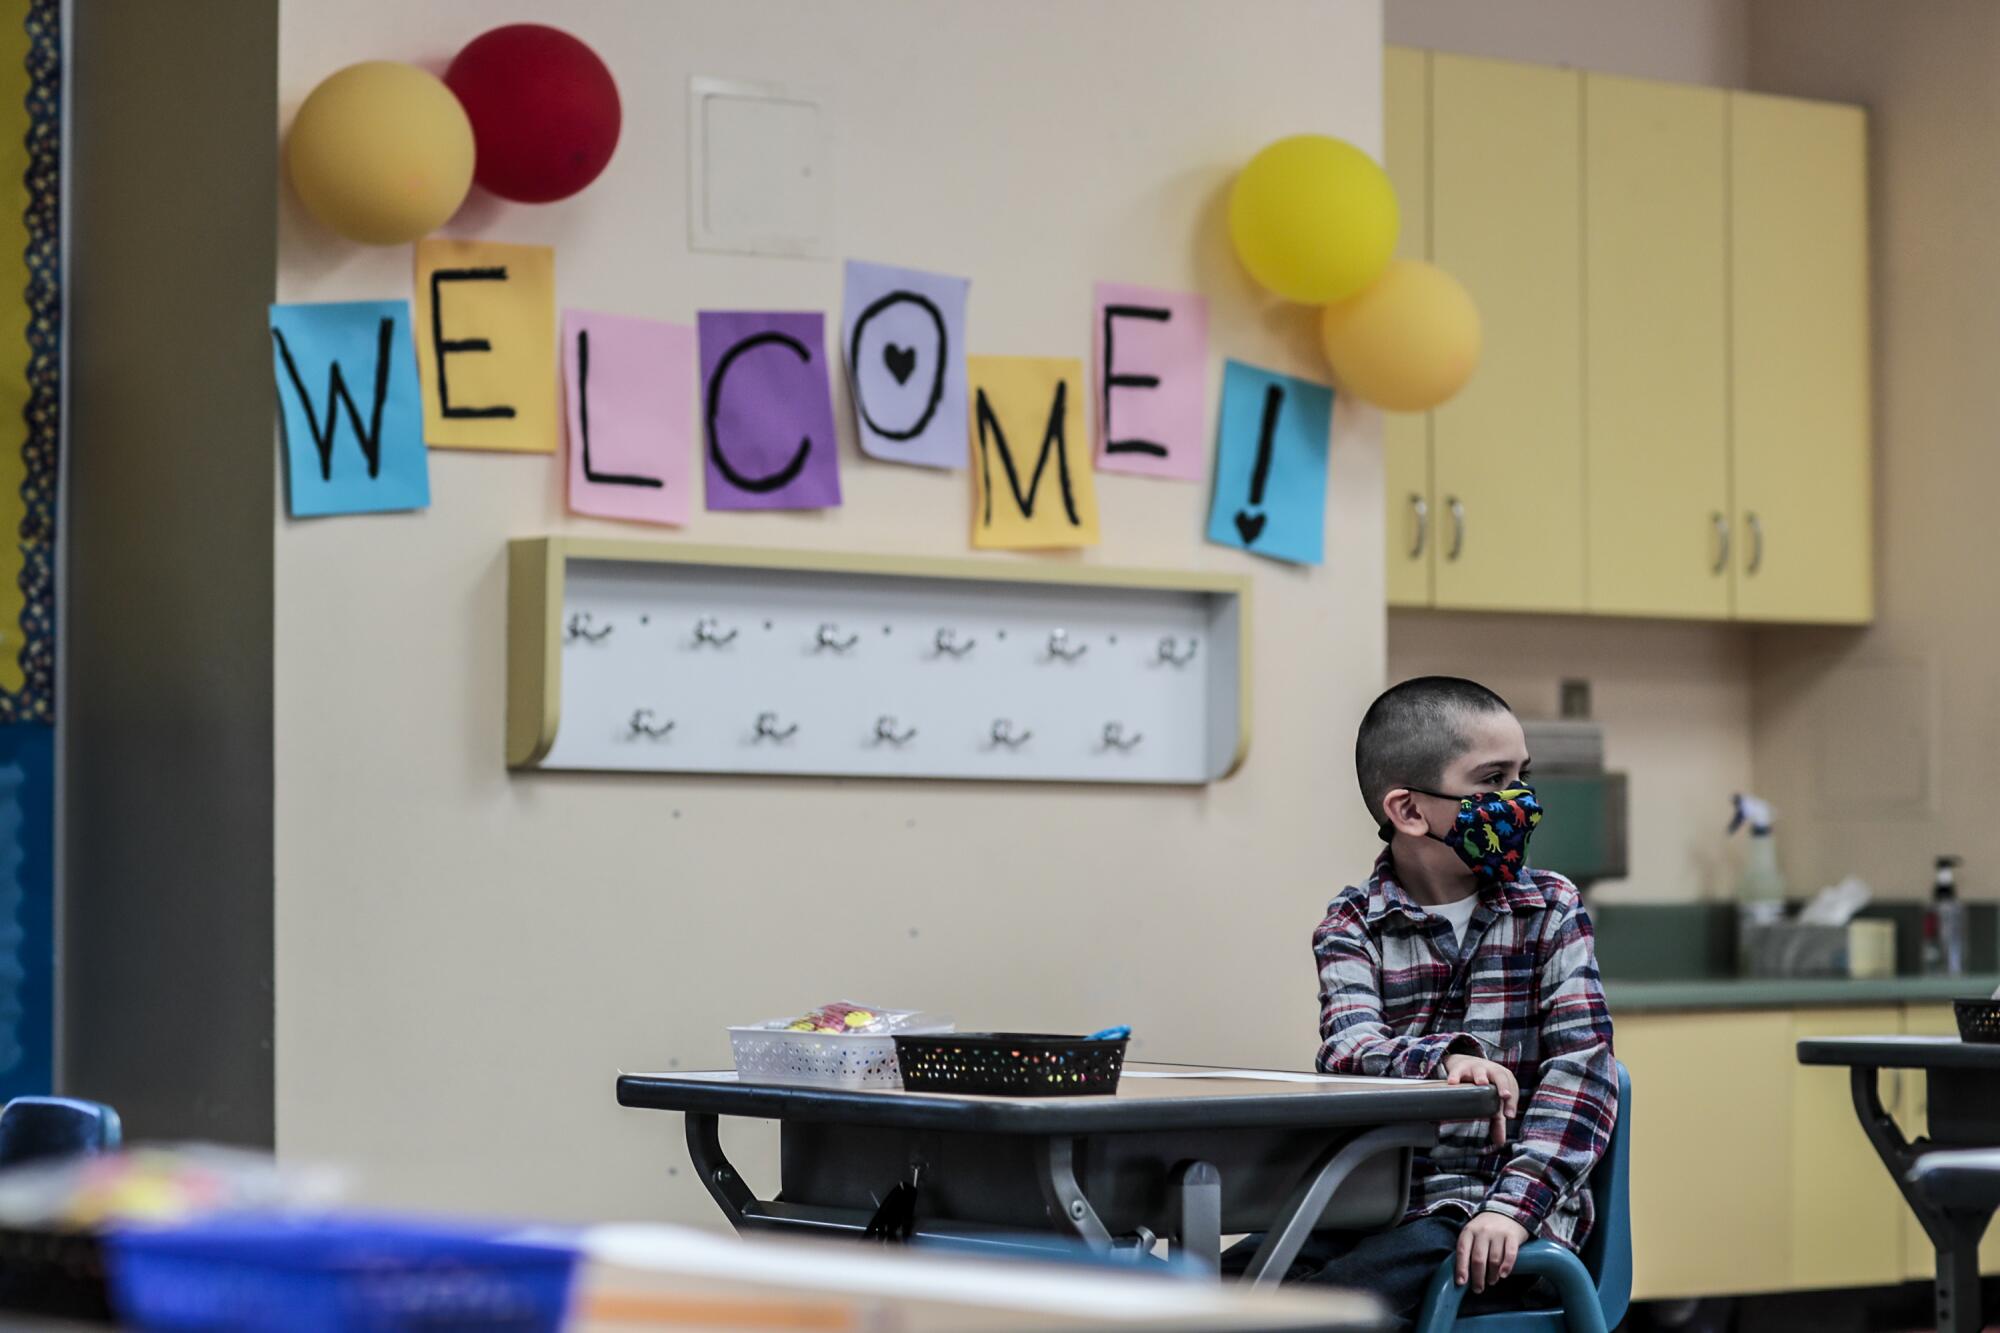 A child sits in front of a sign on the wall that says "Welcome!"